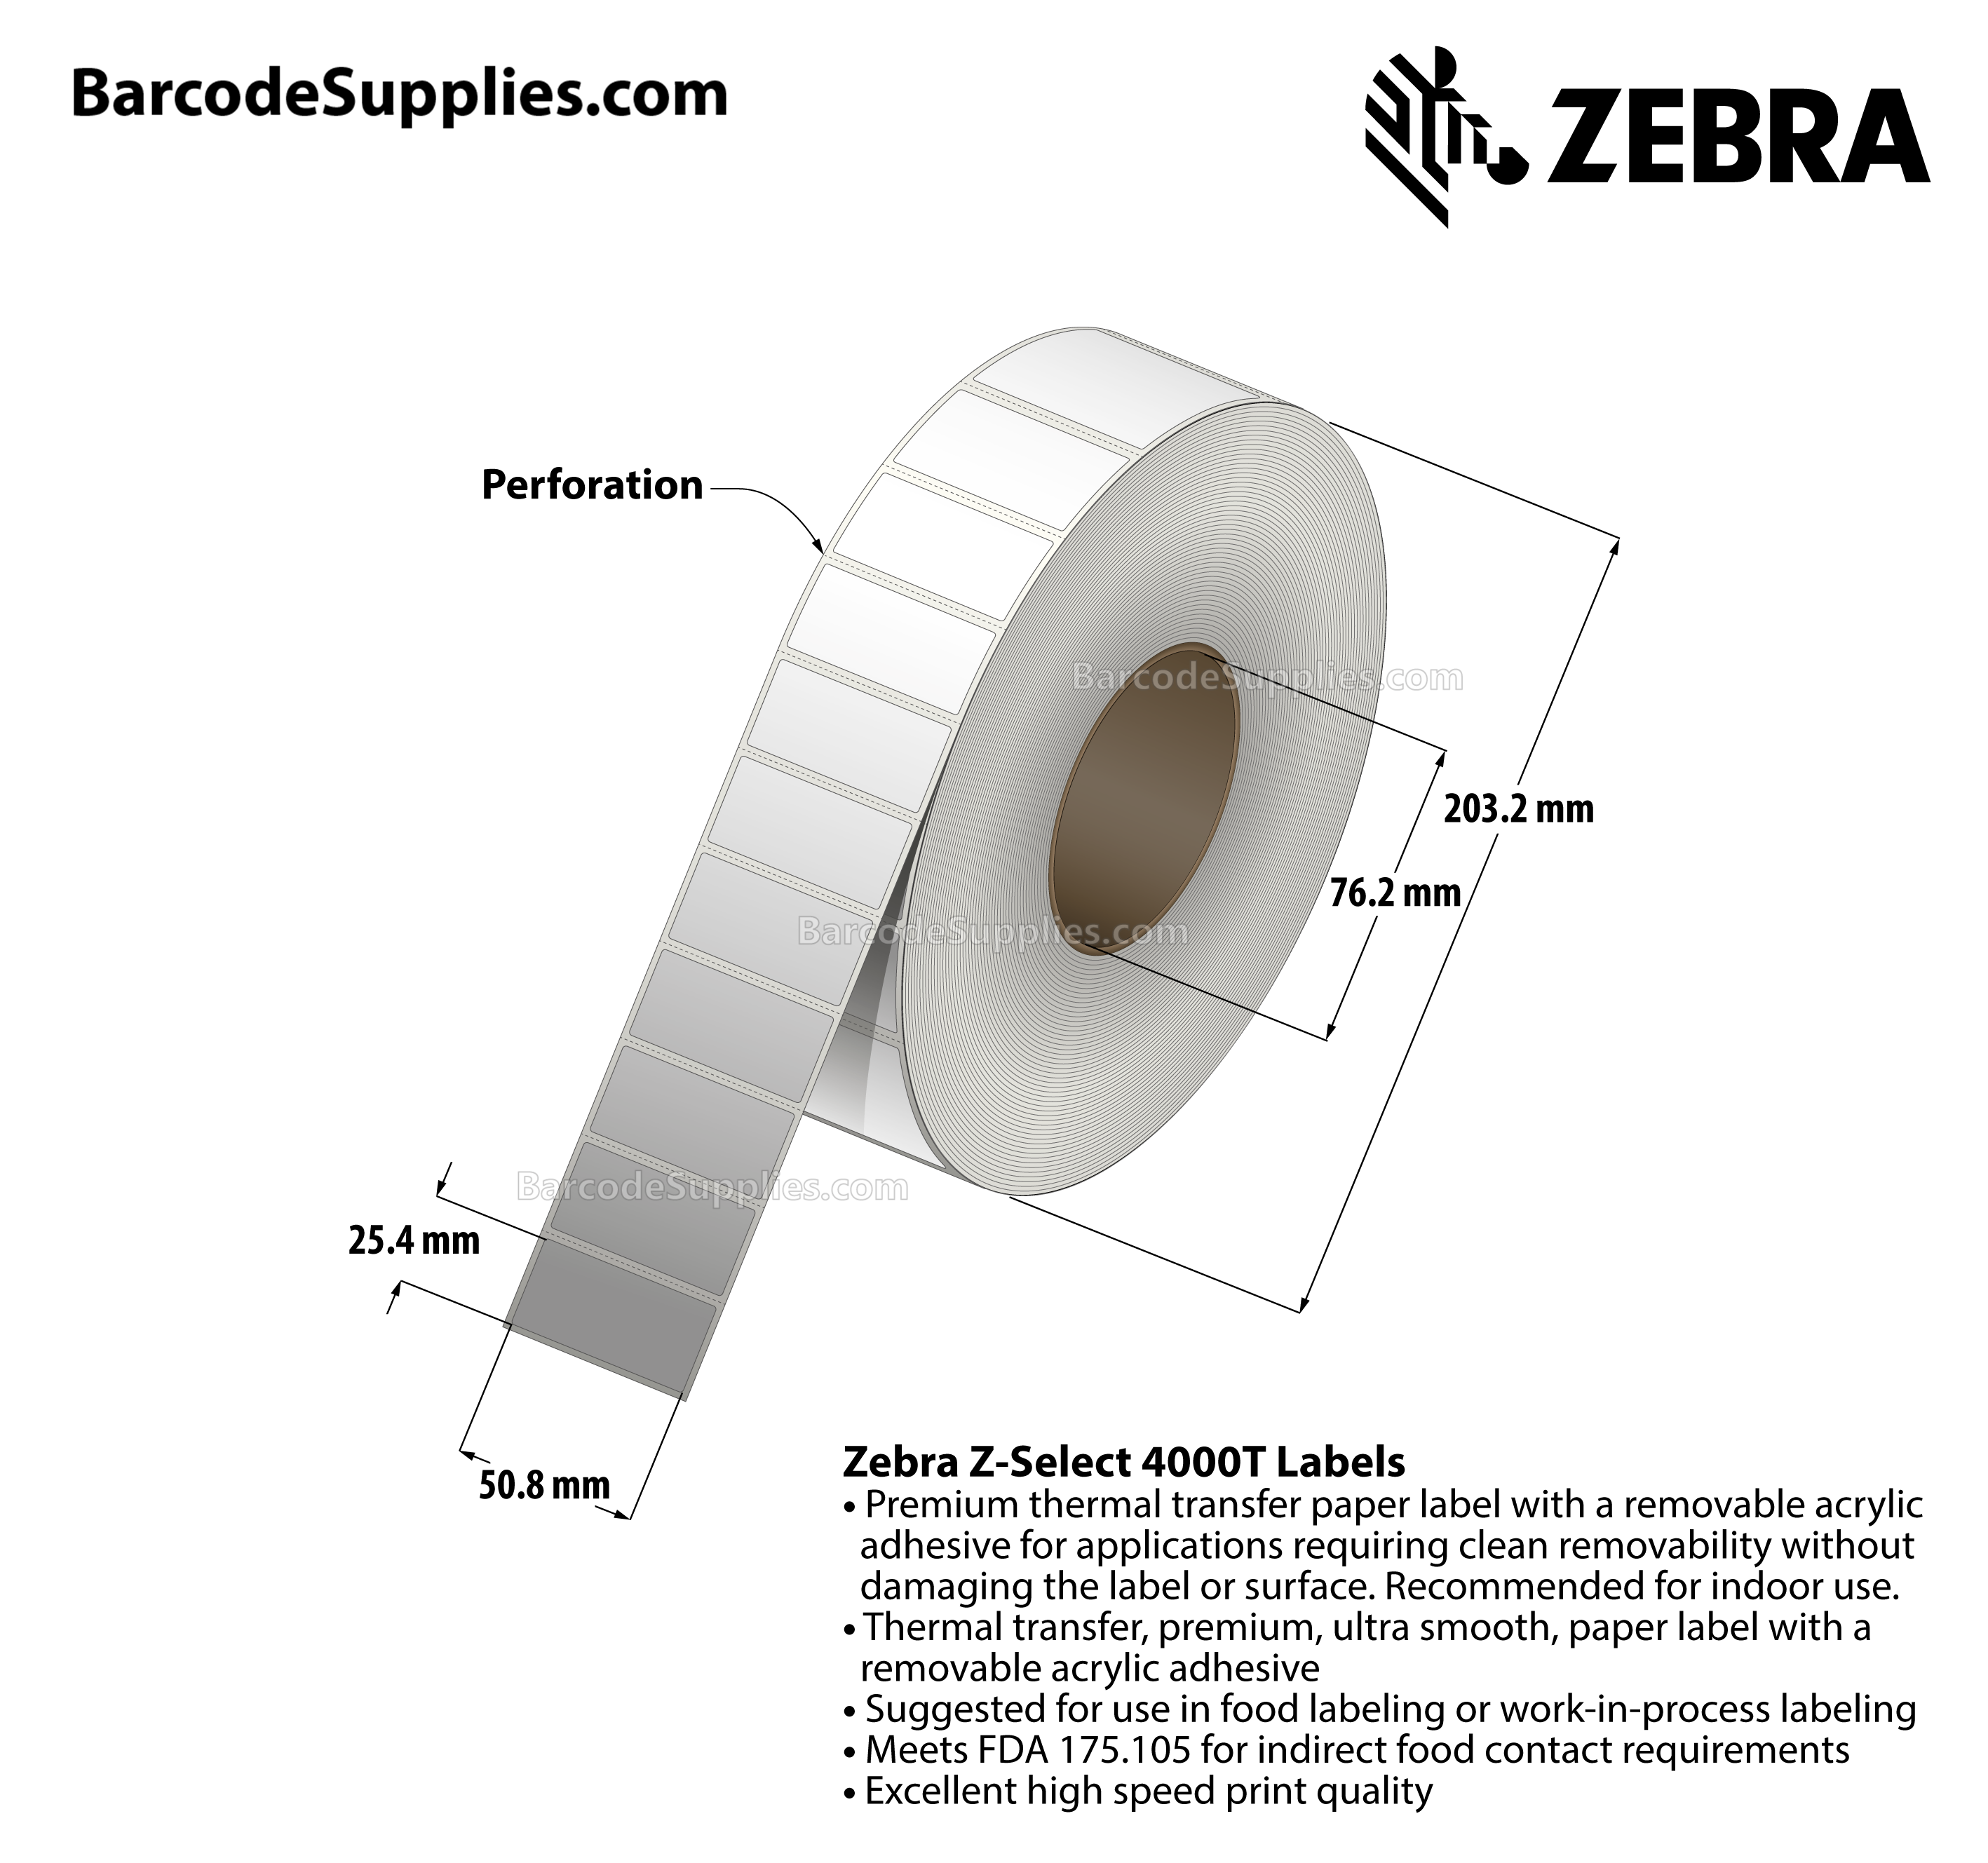 2 x 1 Thermal Transfer White Z-Select 4000T Removable Labels With Removable Adhesive - Perforated - 3000 Labels Per Roll - Carton Of 4 Rolls - 12000 Labels Total - MPN: 10022944